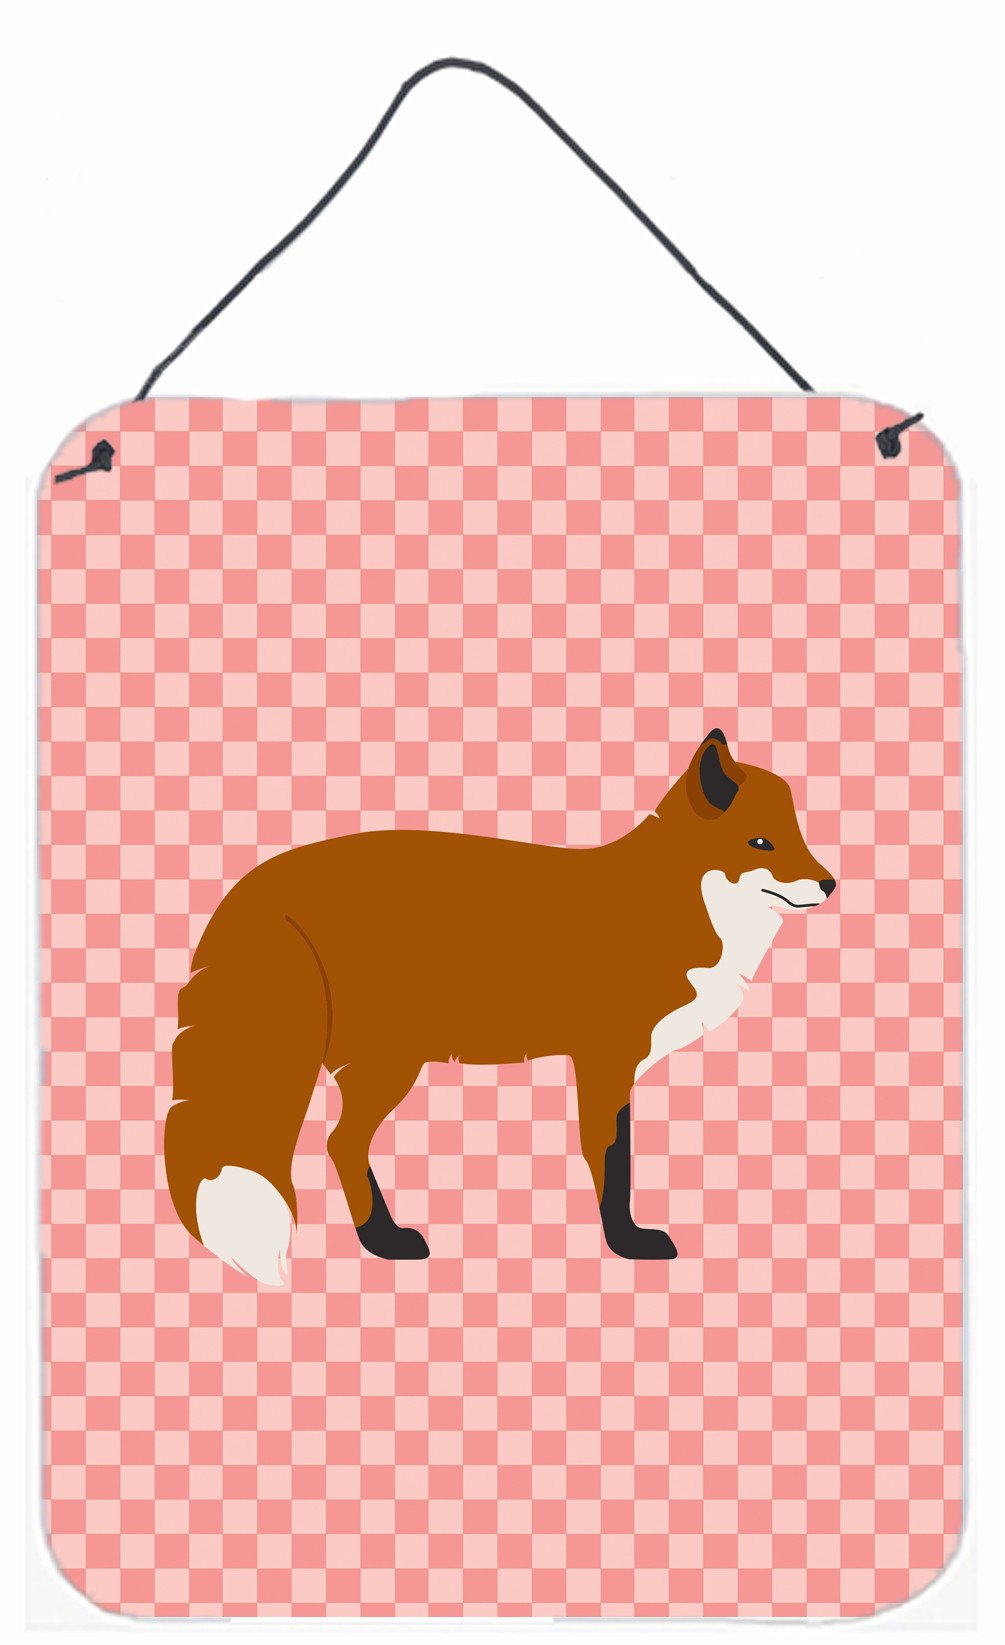 Red Fox Pink Check Wall or Door Hanging Prints BB7876DS1216 by Caroline's Treasures